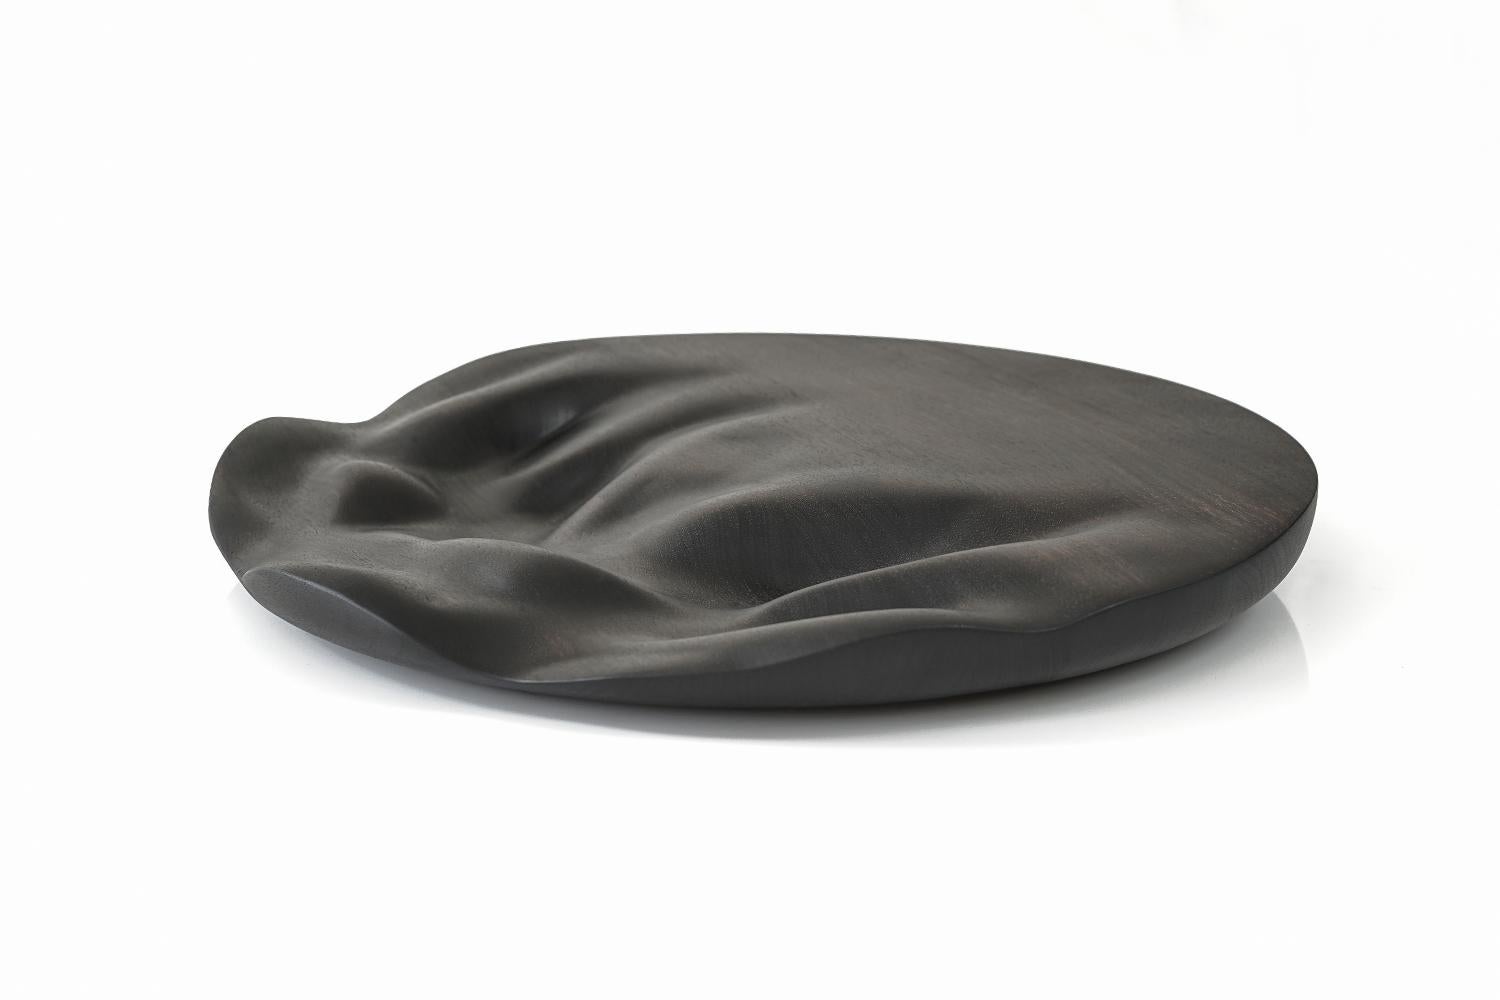 Small flow round contemporary ebonized serving board by Vincent Pocsik

Carved walnut cutting board with ebonized finish.

Natural food safe oil and wax finish. 

Vincent Pocsik finds the balance between old and new fabrication techniques